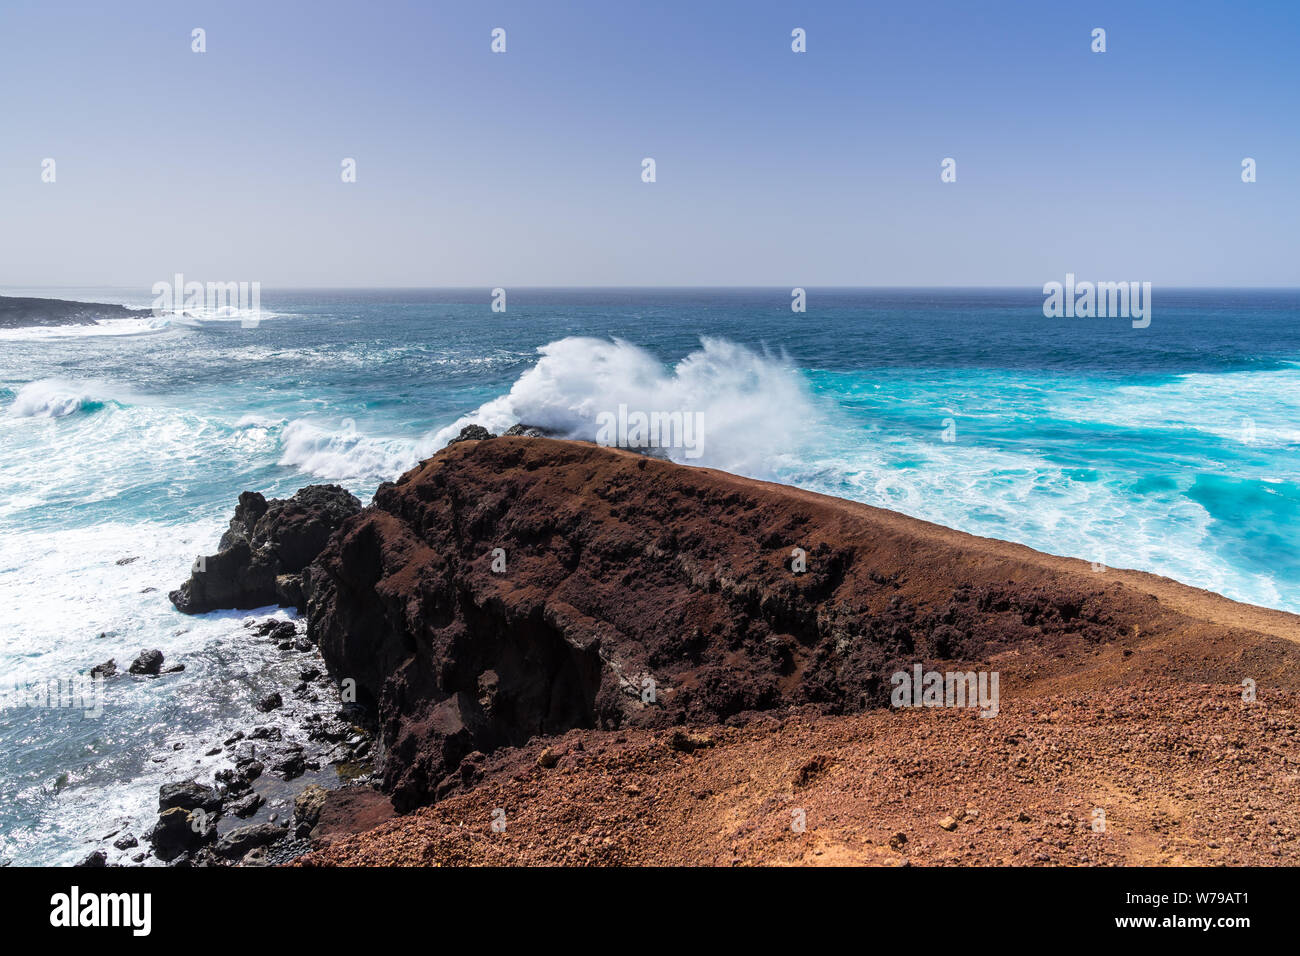 Spain, Lanzarote, Amazing strong waves breaking on rocks creating huge spume clouds Stock Photo